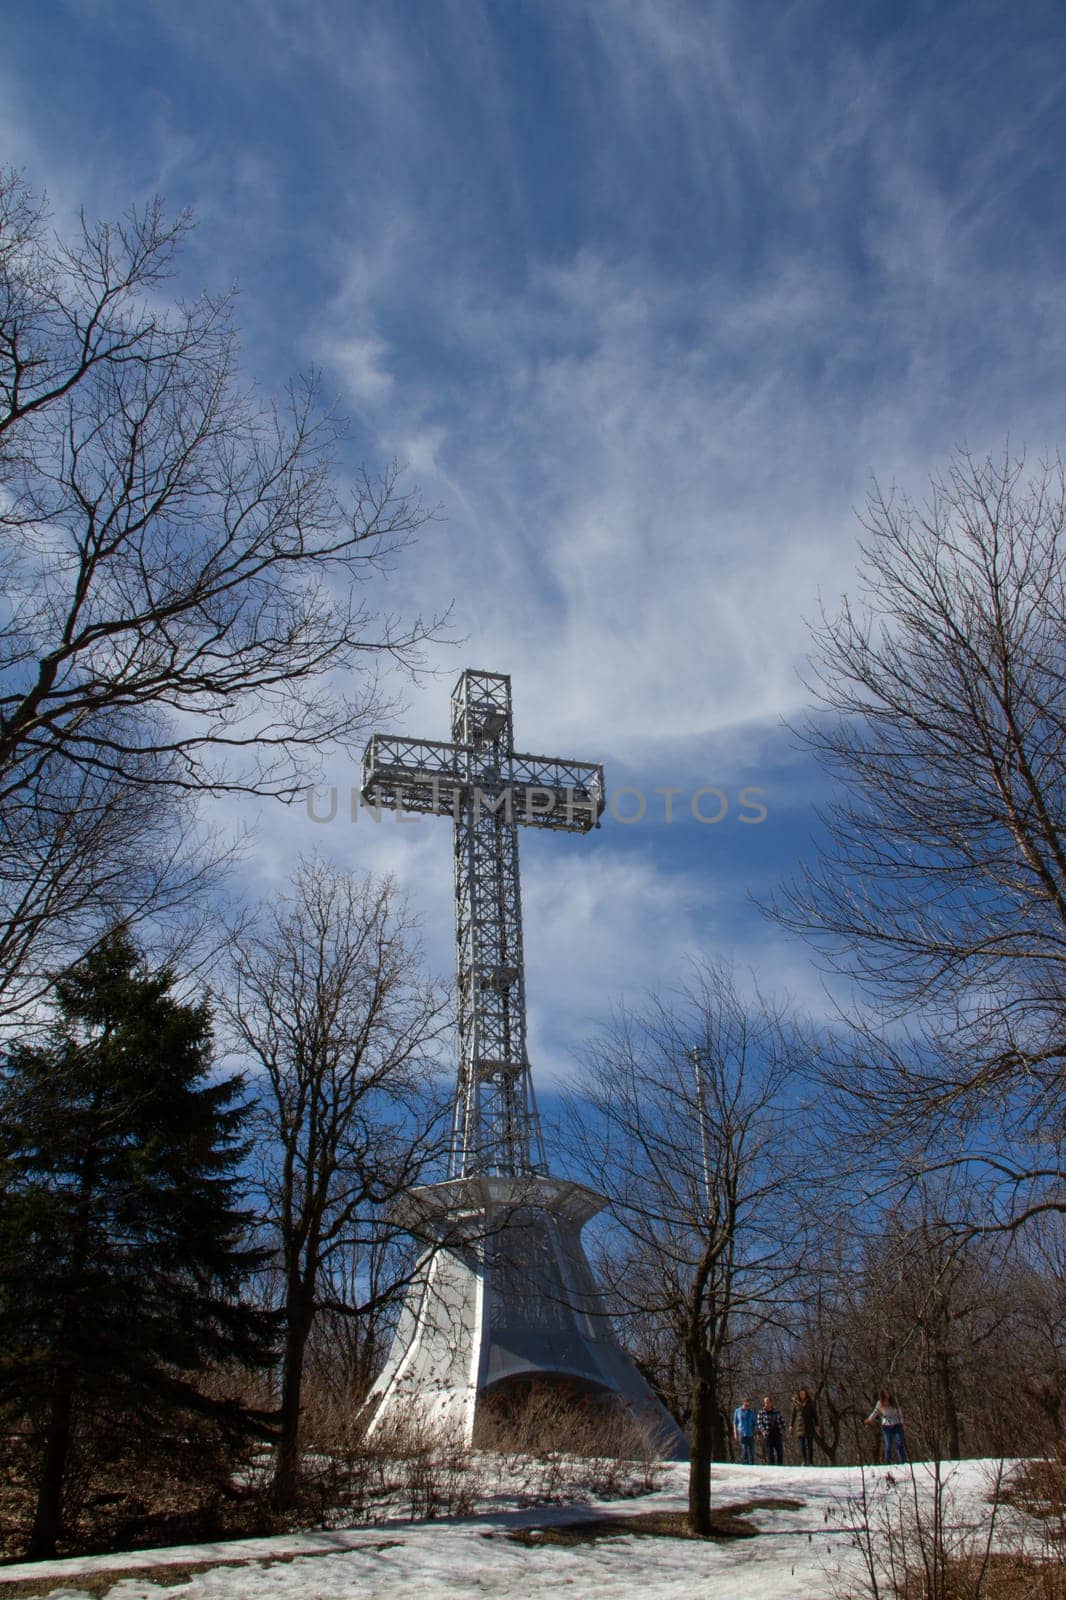 The Mount Royal Cross, built in 1924, surrounded by trees and snow in late winter by Granchinho